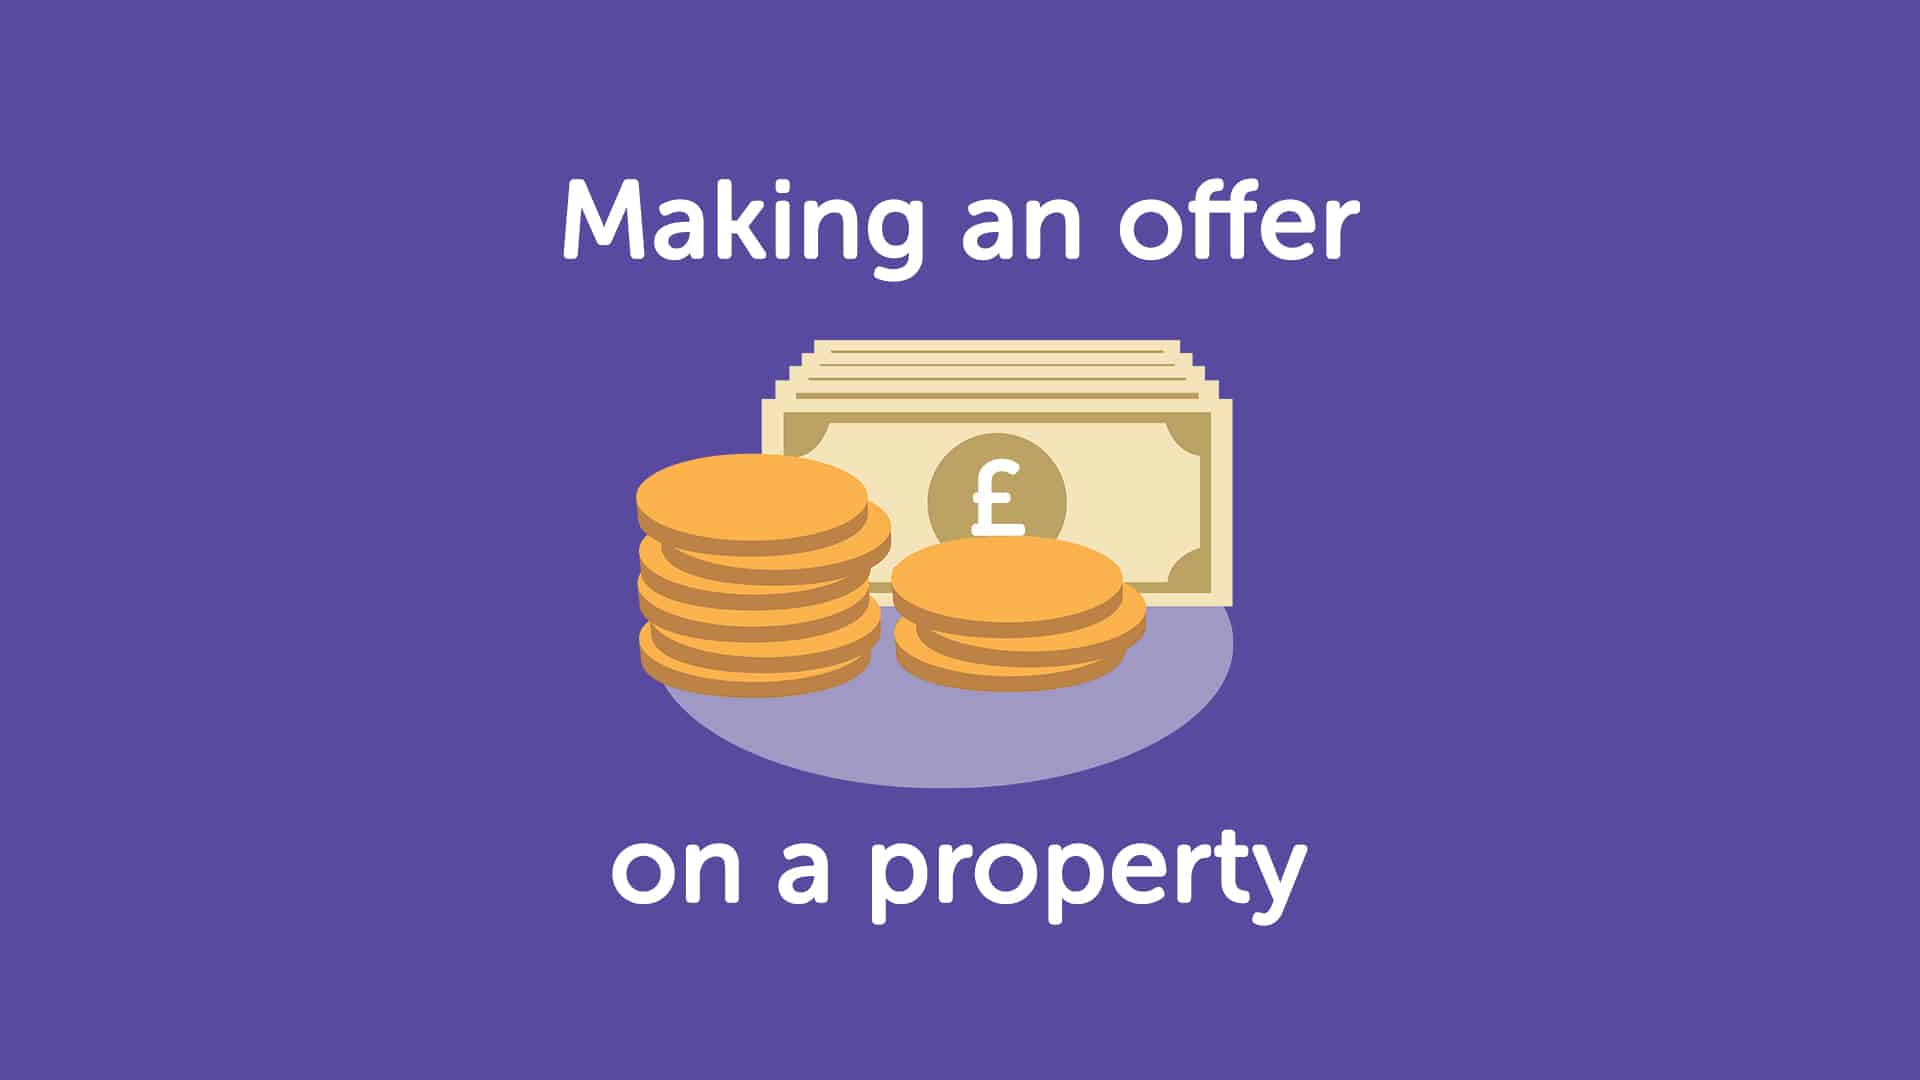 How to Make an Offer on a Property in Cardiff